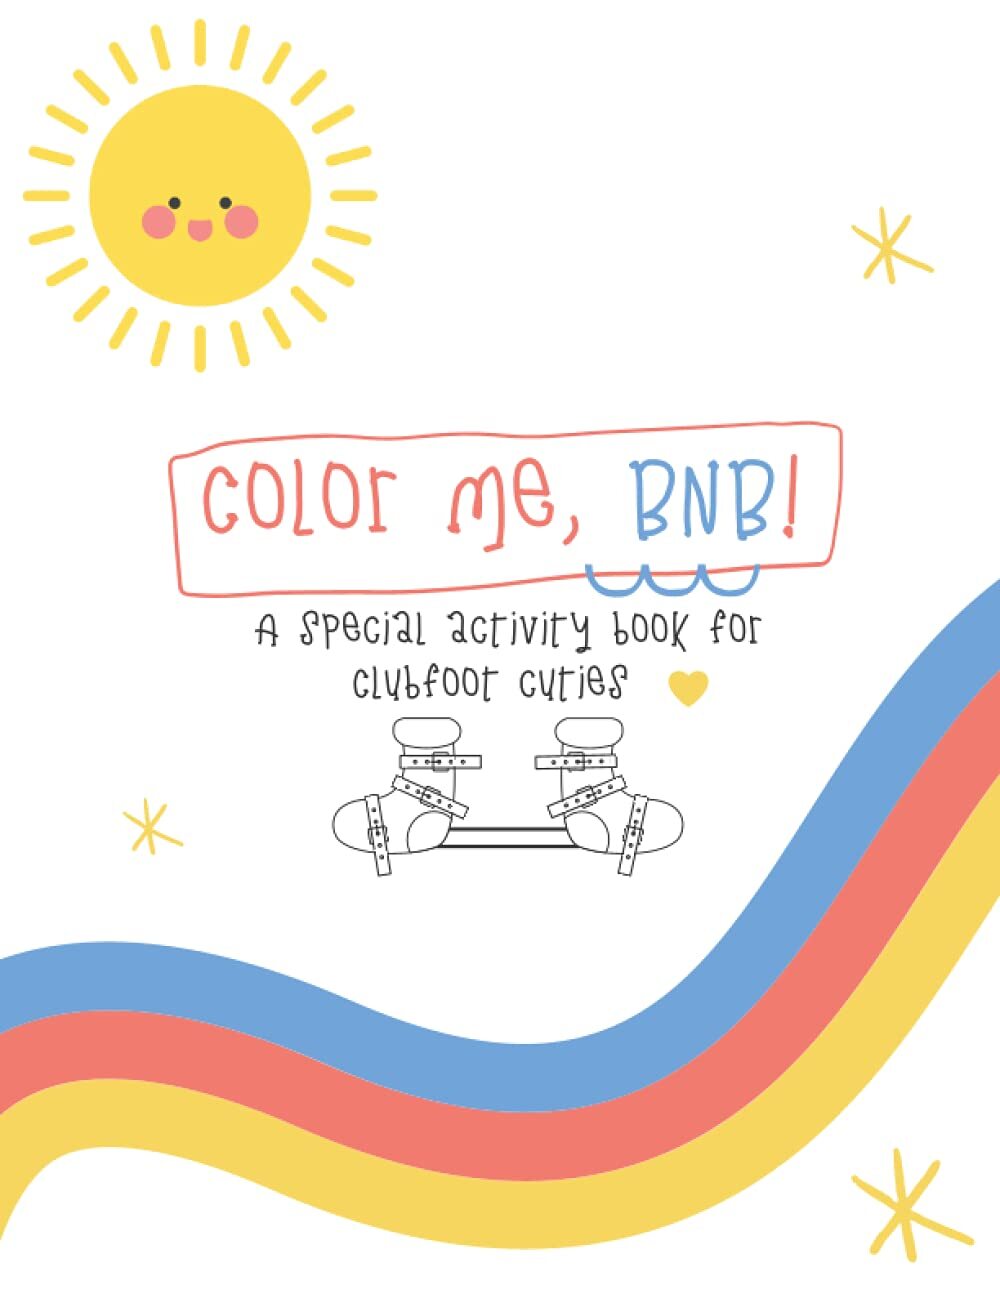 Color Me, BNB!: A special activity book for clubfoot cuties